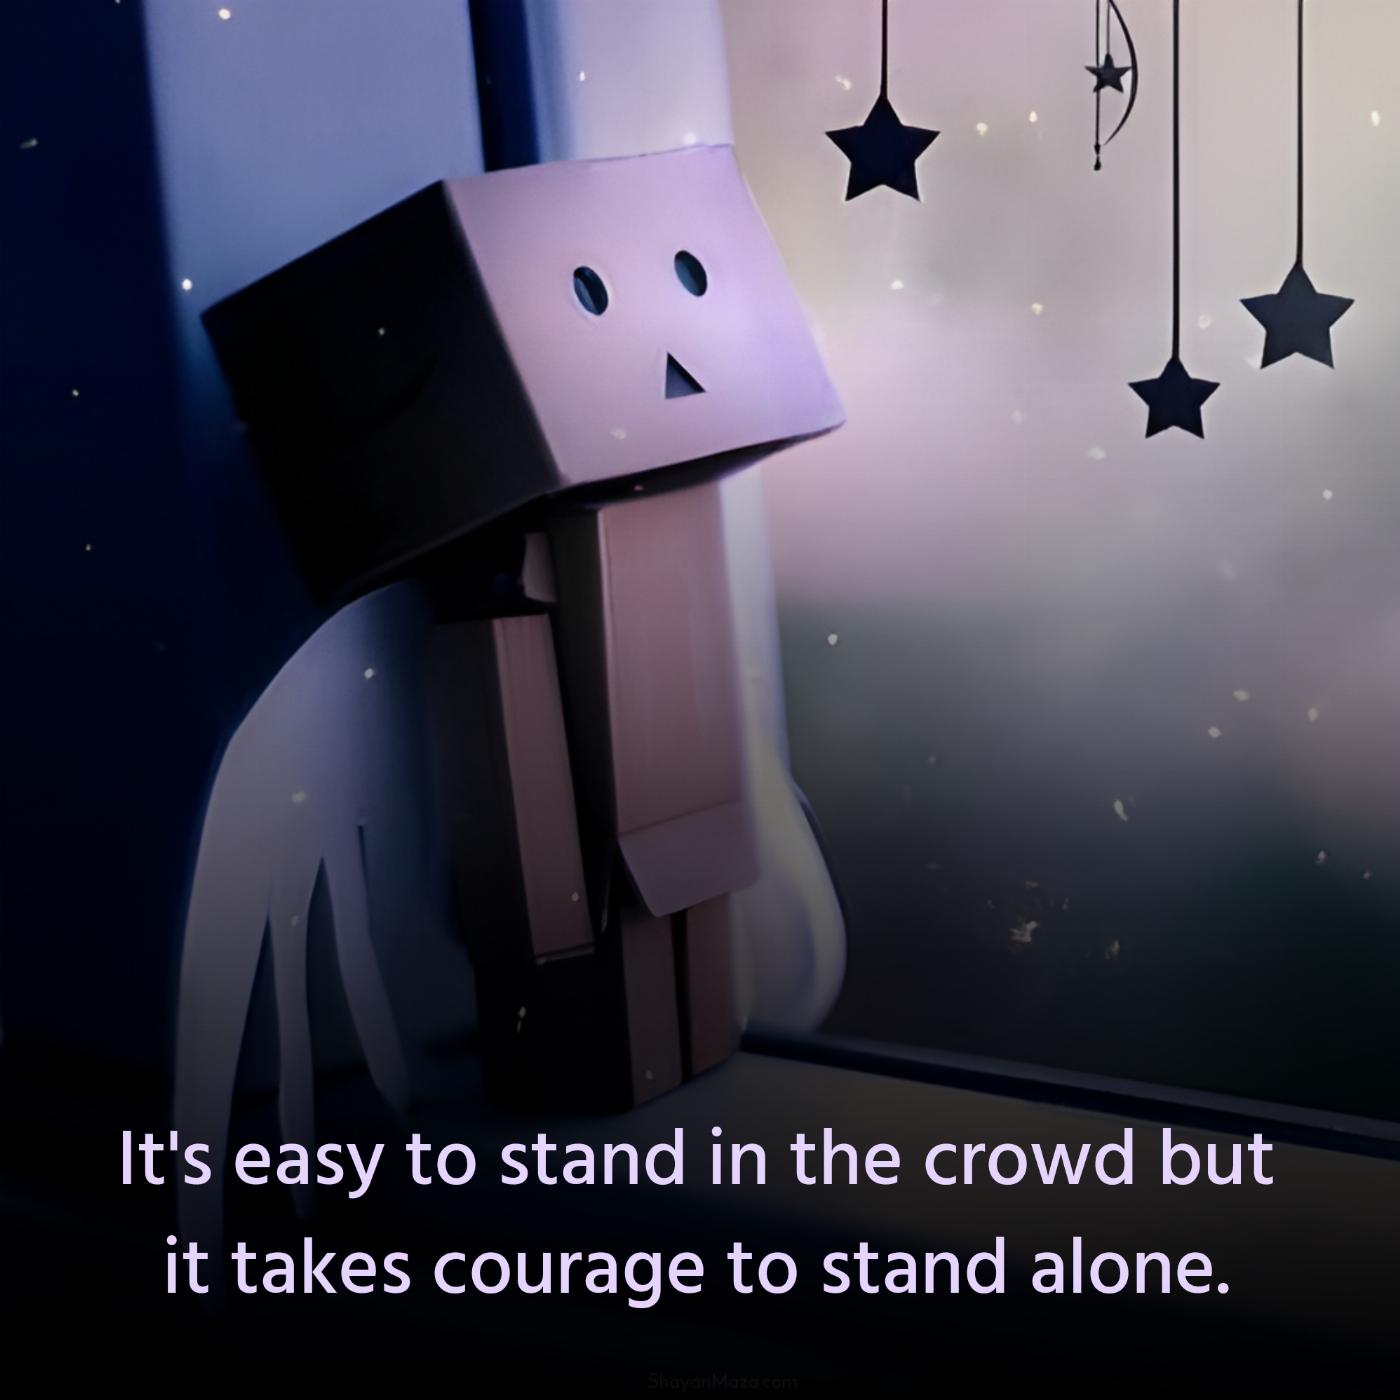 It's easy to stand in the crowd but it takes courage to stand alone